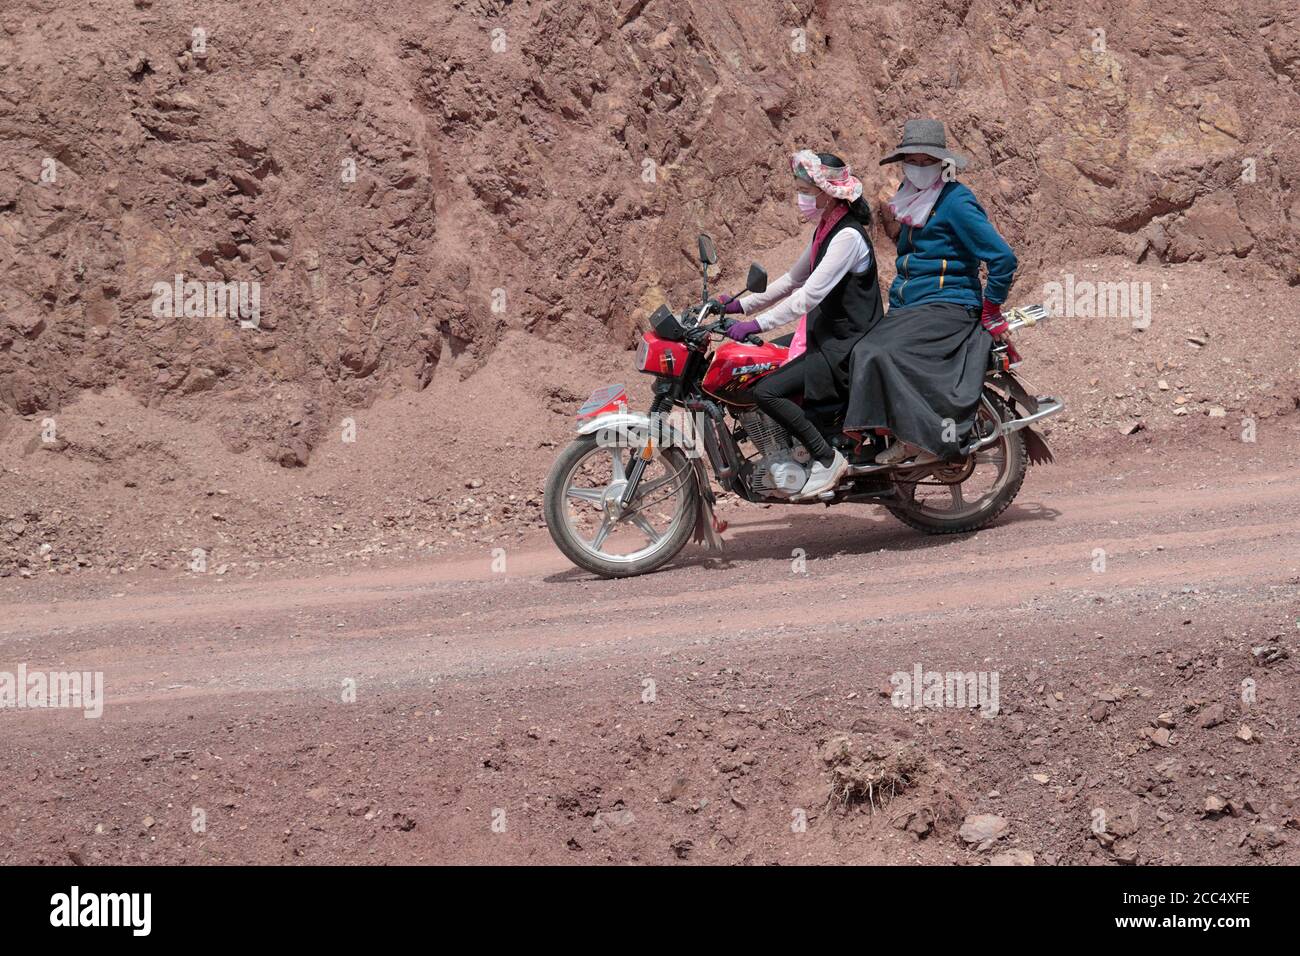 Two women on Chinese motorcycle, mountain road in south Qinghai Province, China 27th August 2017 Stock Photo